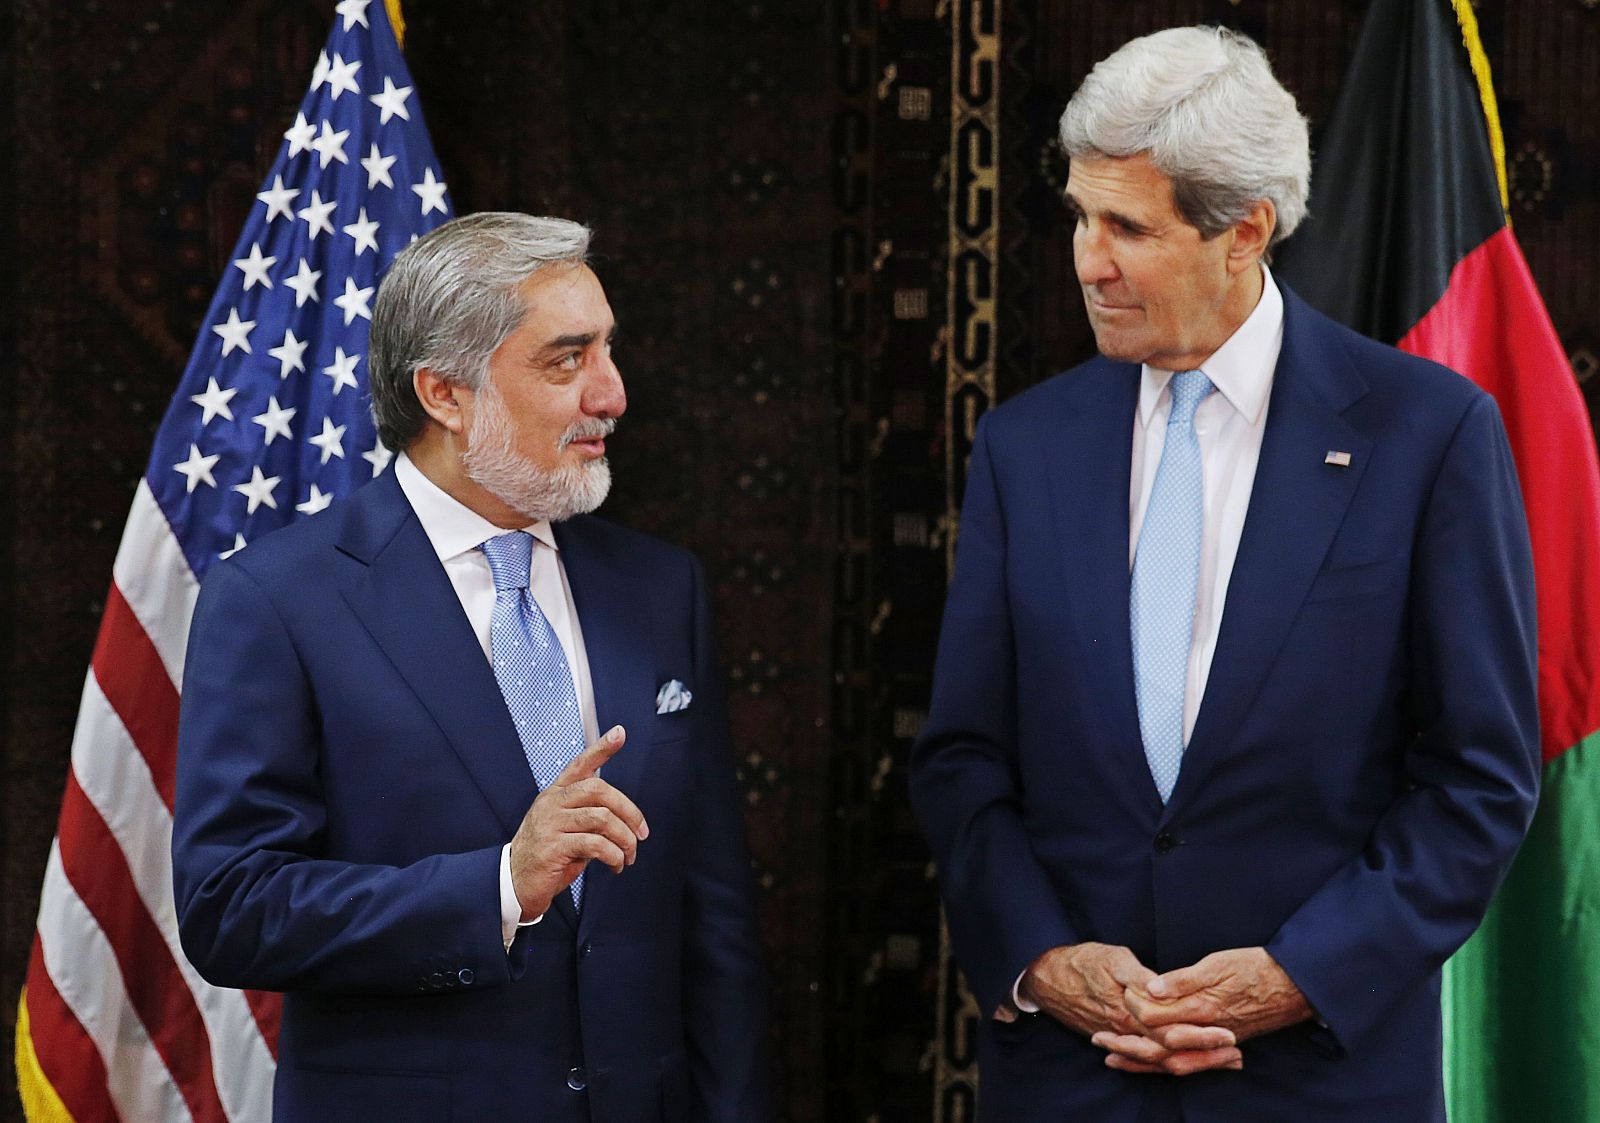 Afghanistan's presidential candidate Abdullah speaks to U.S. Secretary of State Kerry at the start of a meeting at the U.S. embassy in Kabul